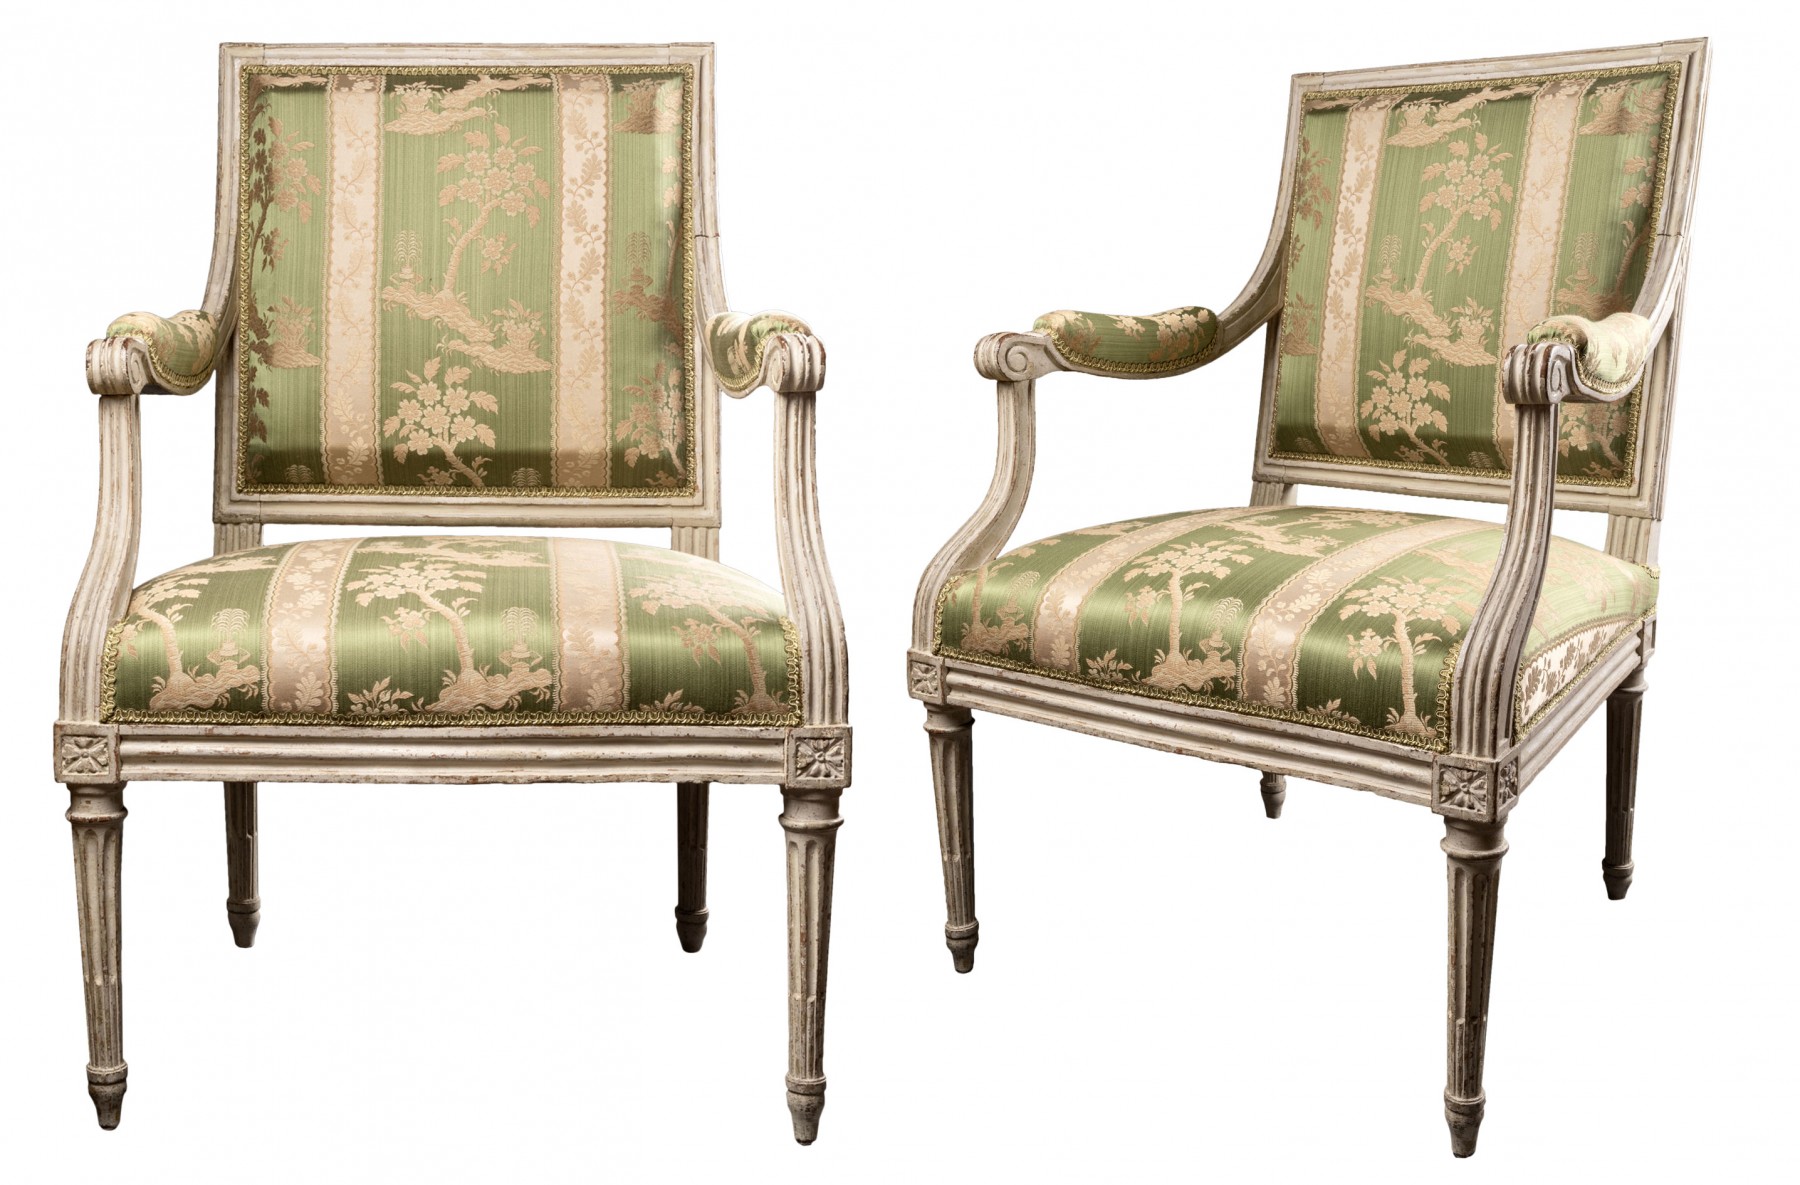 Pair of Louis XVI gilded armchairs, French